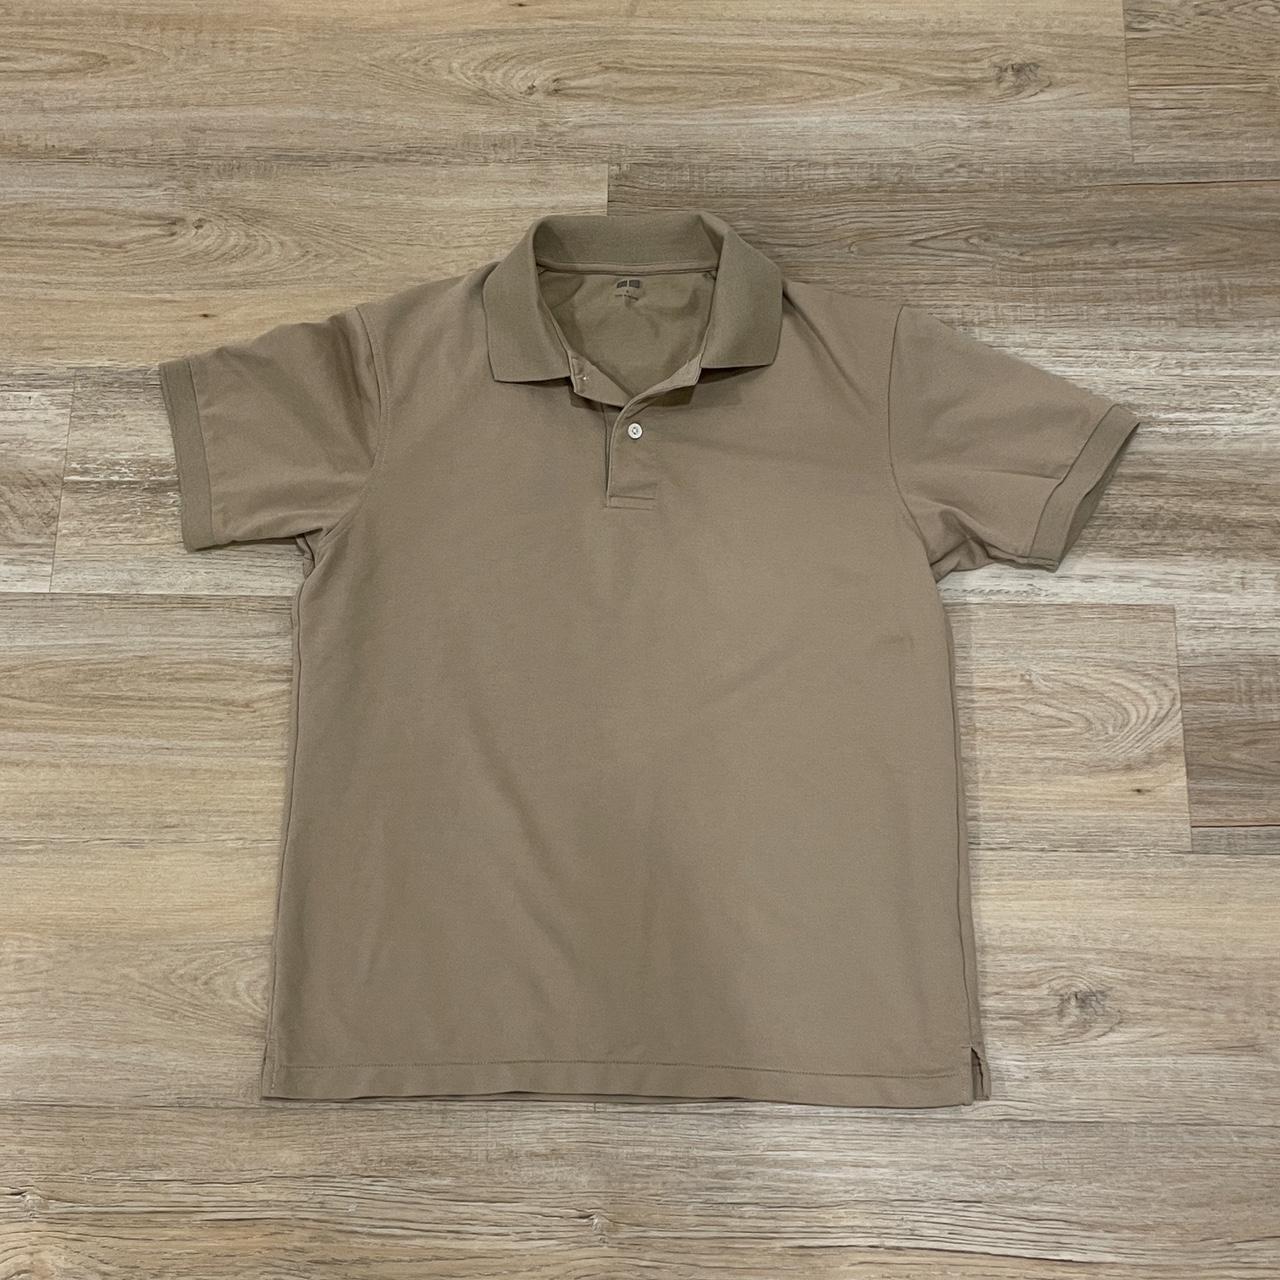 UNIQLO Men's Brown and Tan Polo-shirts | Depop